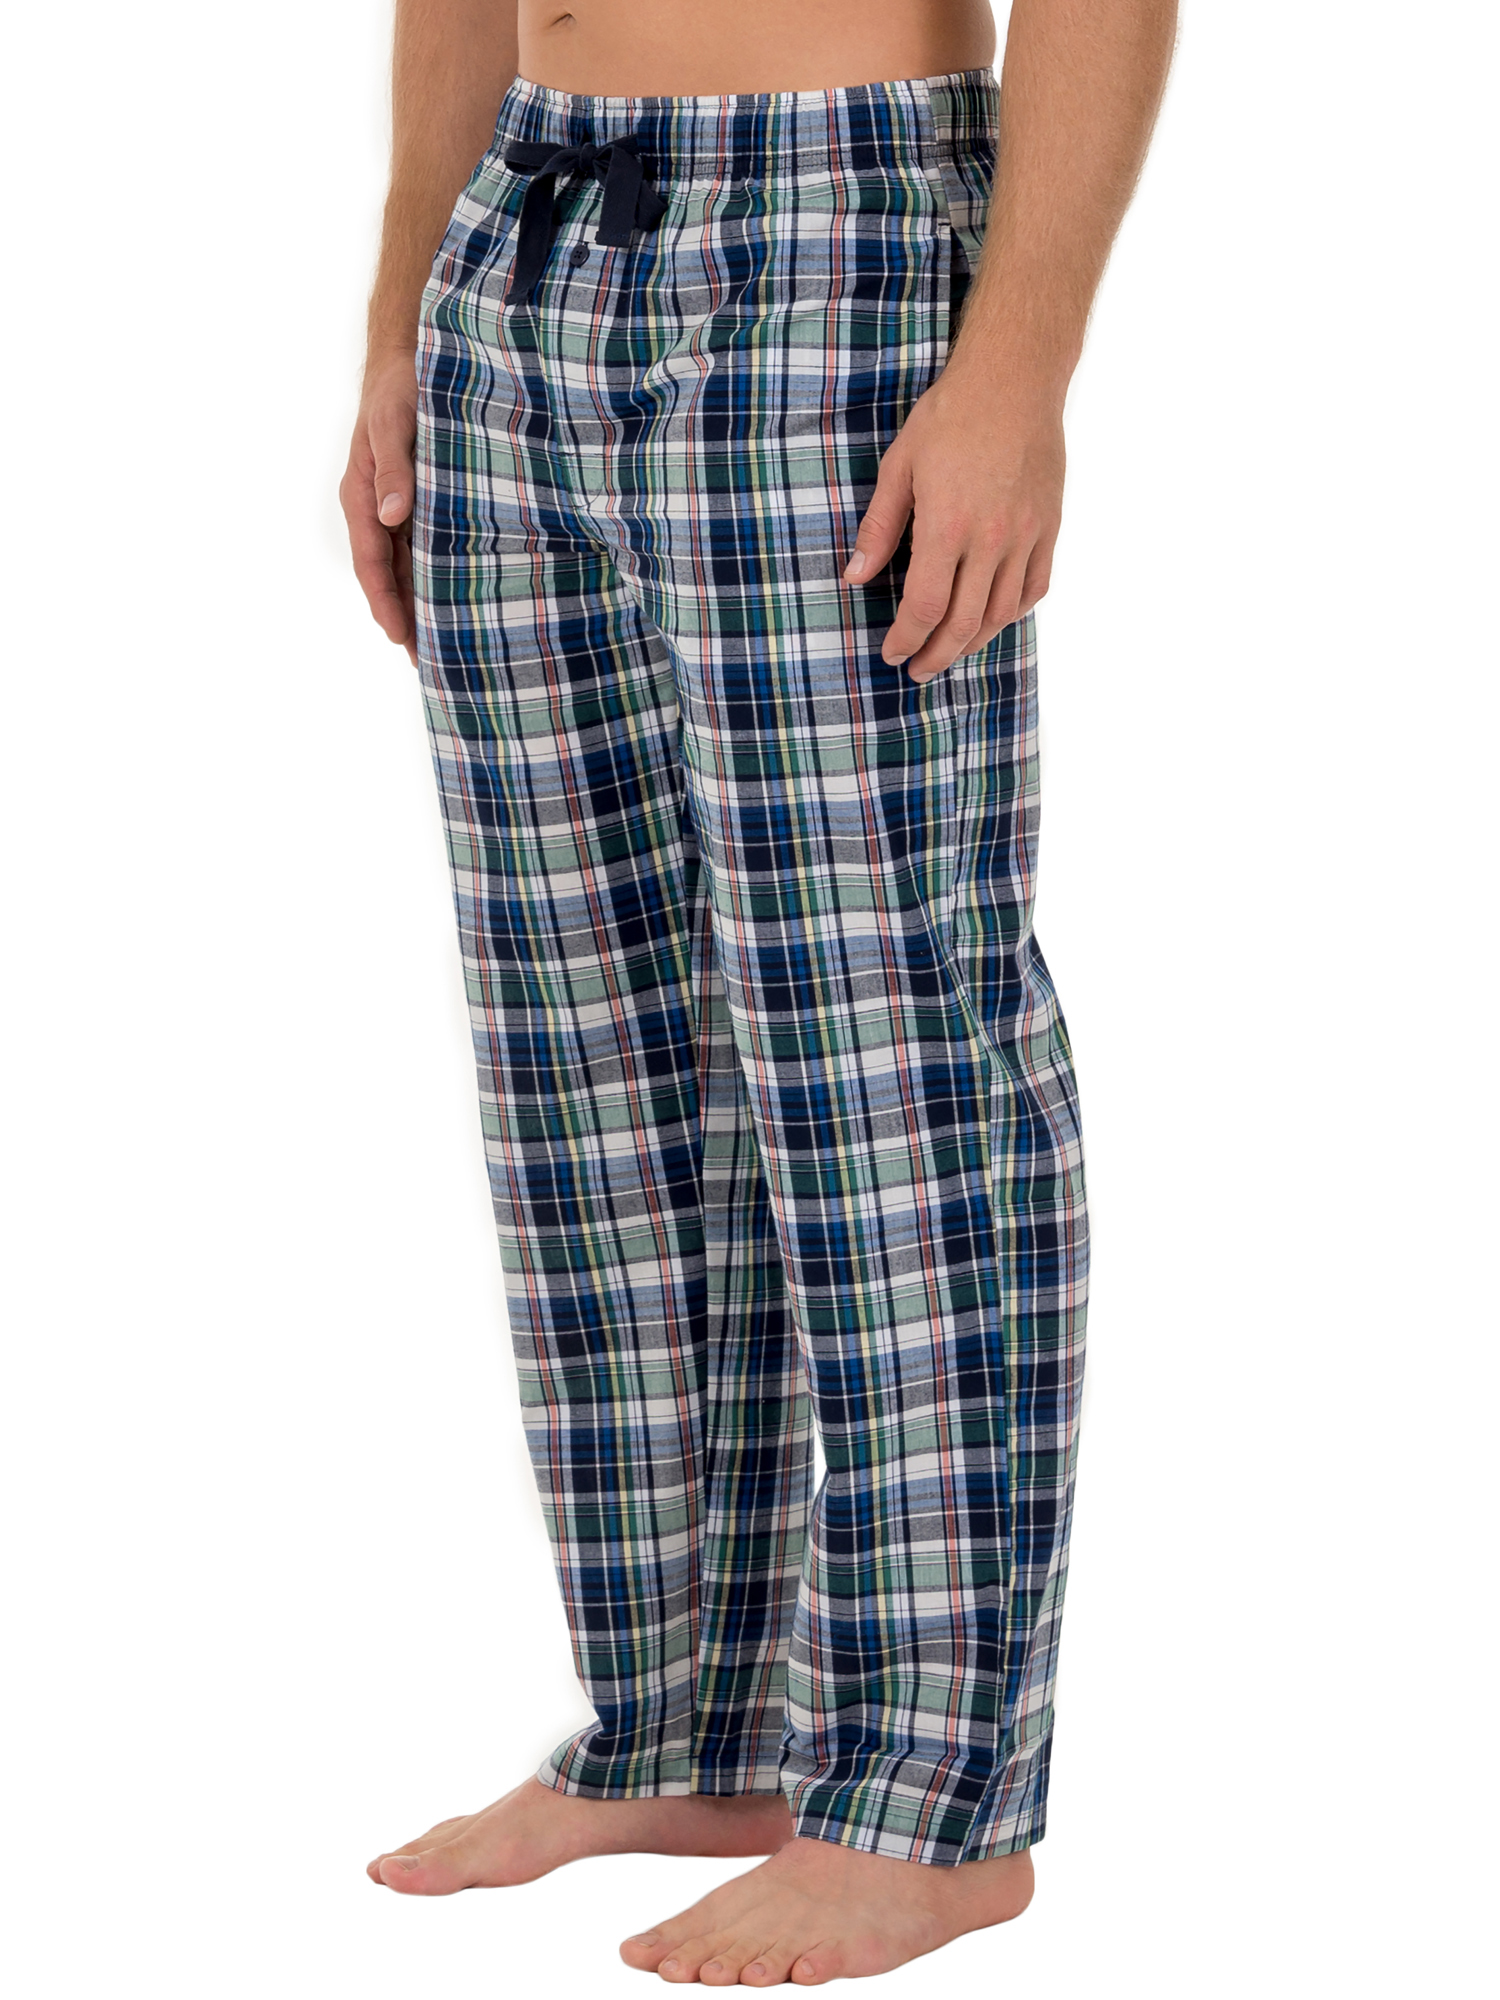 Fruit of the Loom Men's and Big Men's Microsanded Woven Plaid Pajama Pants, Sizes S-6XL & LT-3XLT - image 4 of 5